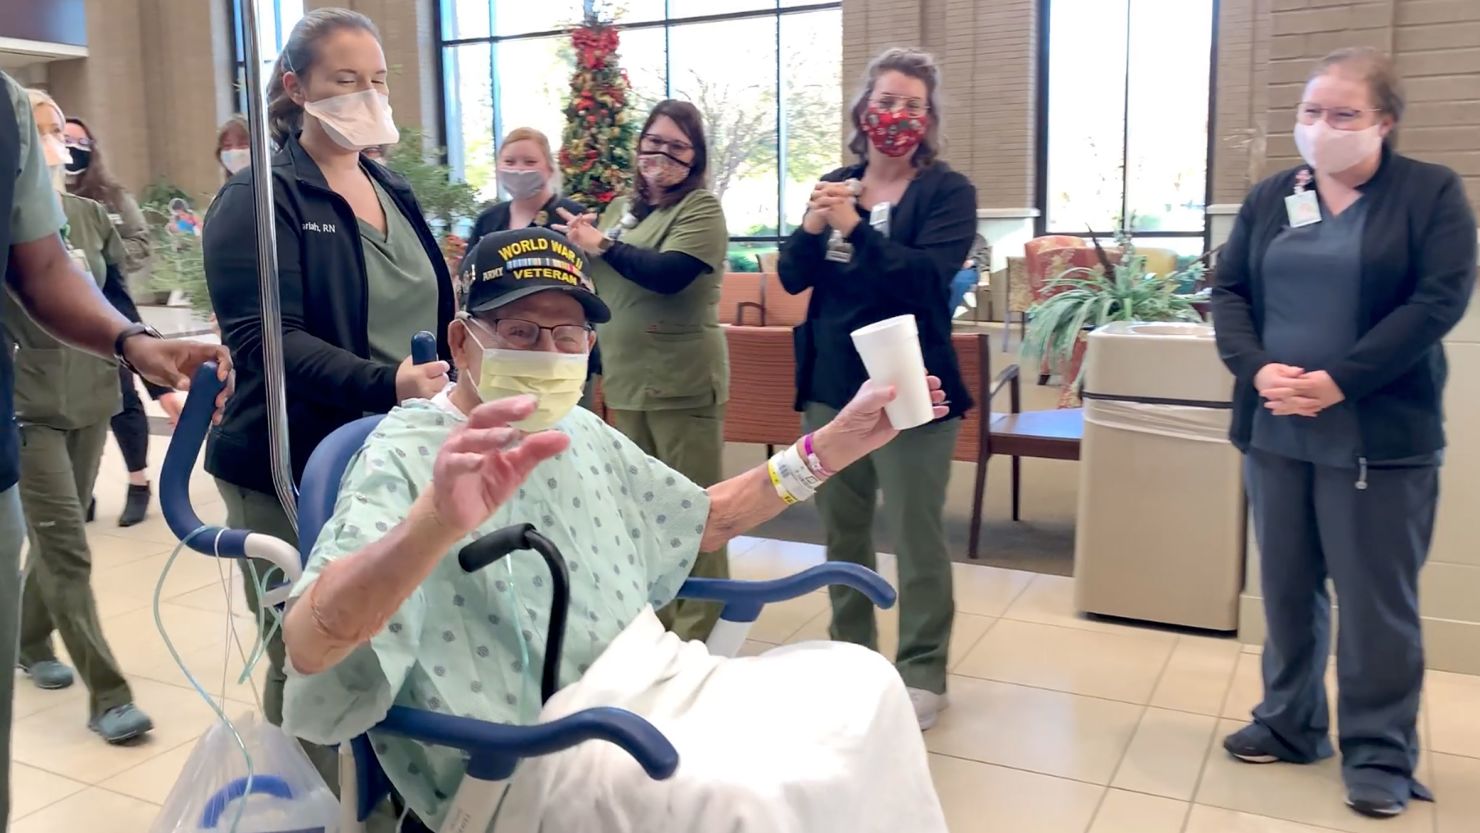 Major Lee Wooten was released from an Alabama hospital after recovering from Covid-19 on Tuesday, December 1, just days before his 104th birthday.